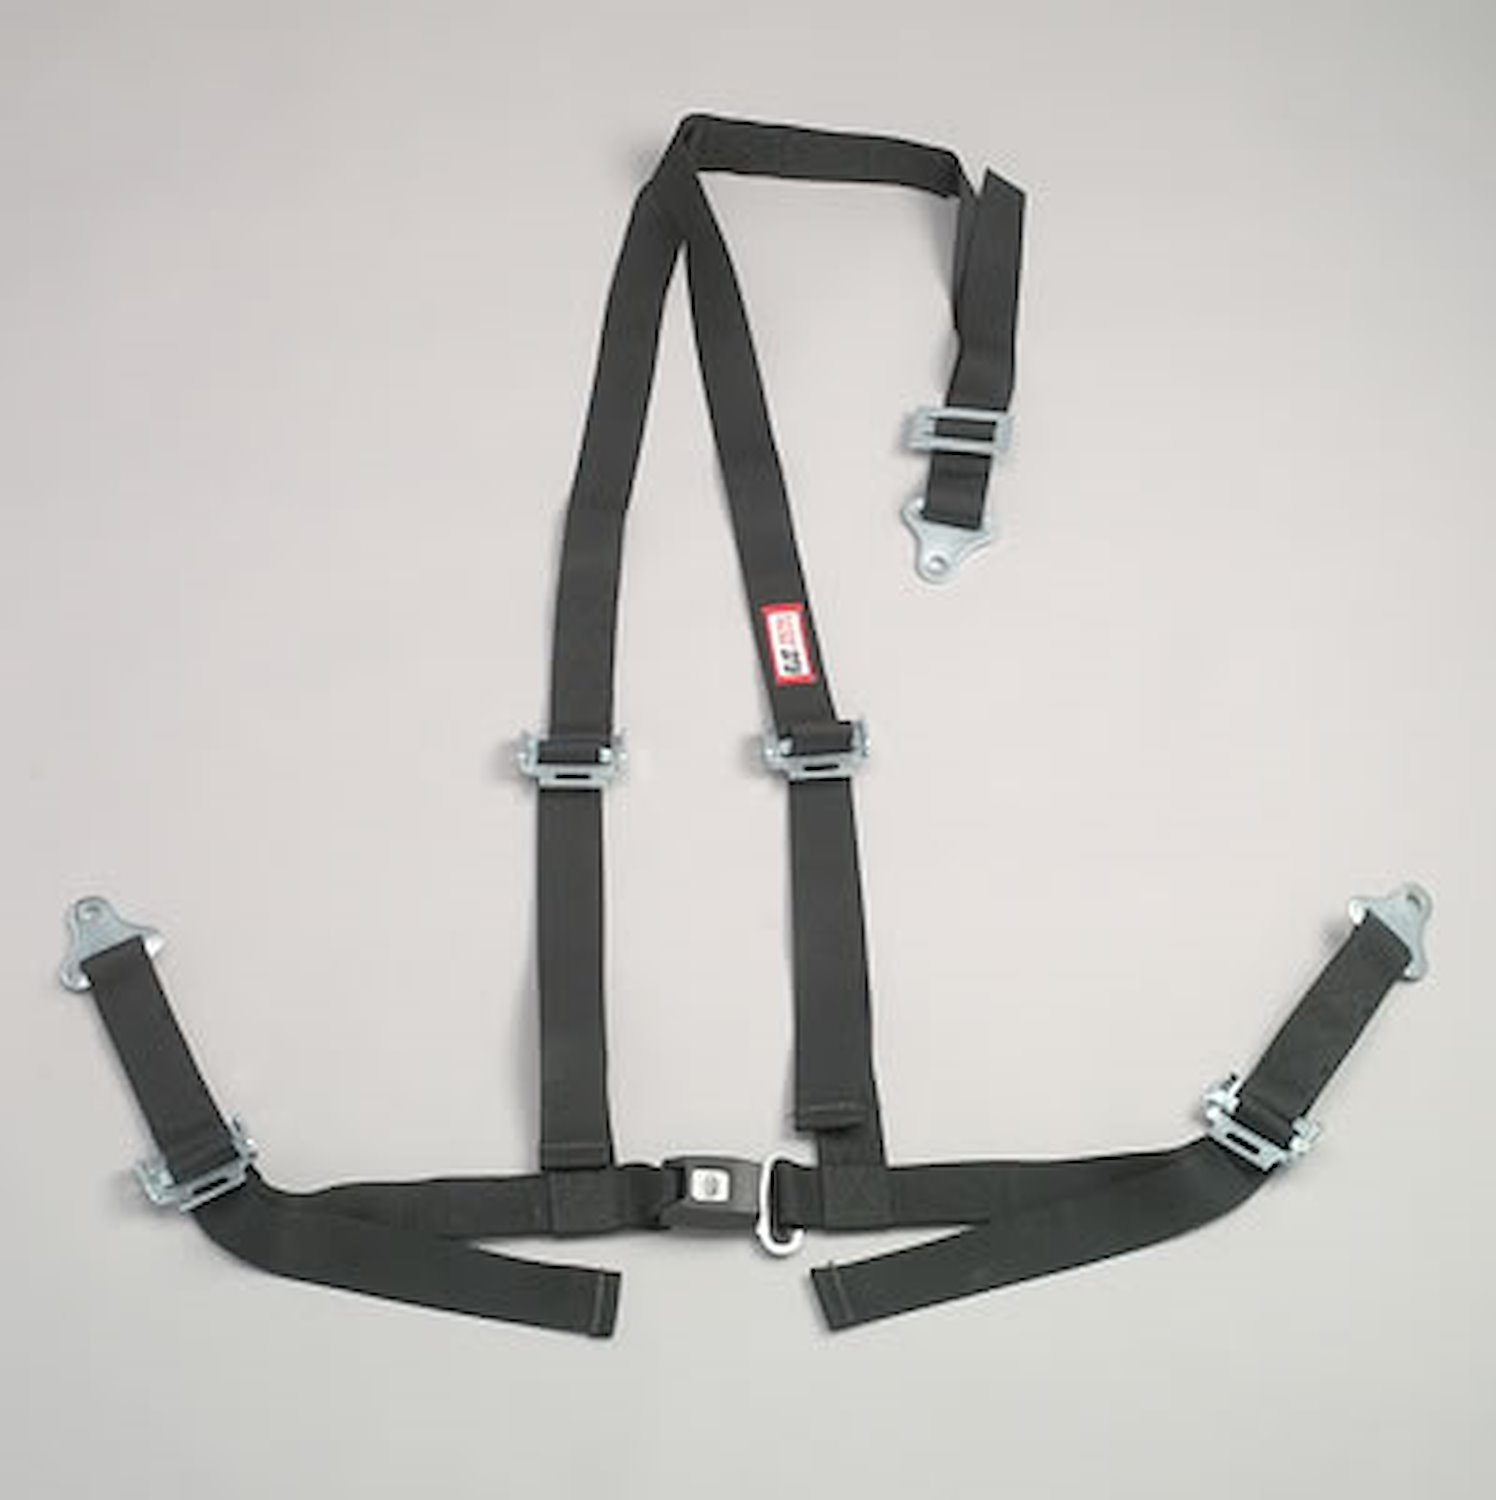 NON-SFI B&T HARNESS 2 PULL DOWN Lap Belt SNAP 2 S. H. Individual FLOOR Mount WRAP/SNAP w/STERNUM STRAP OD GREEN